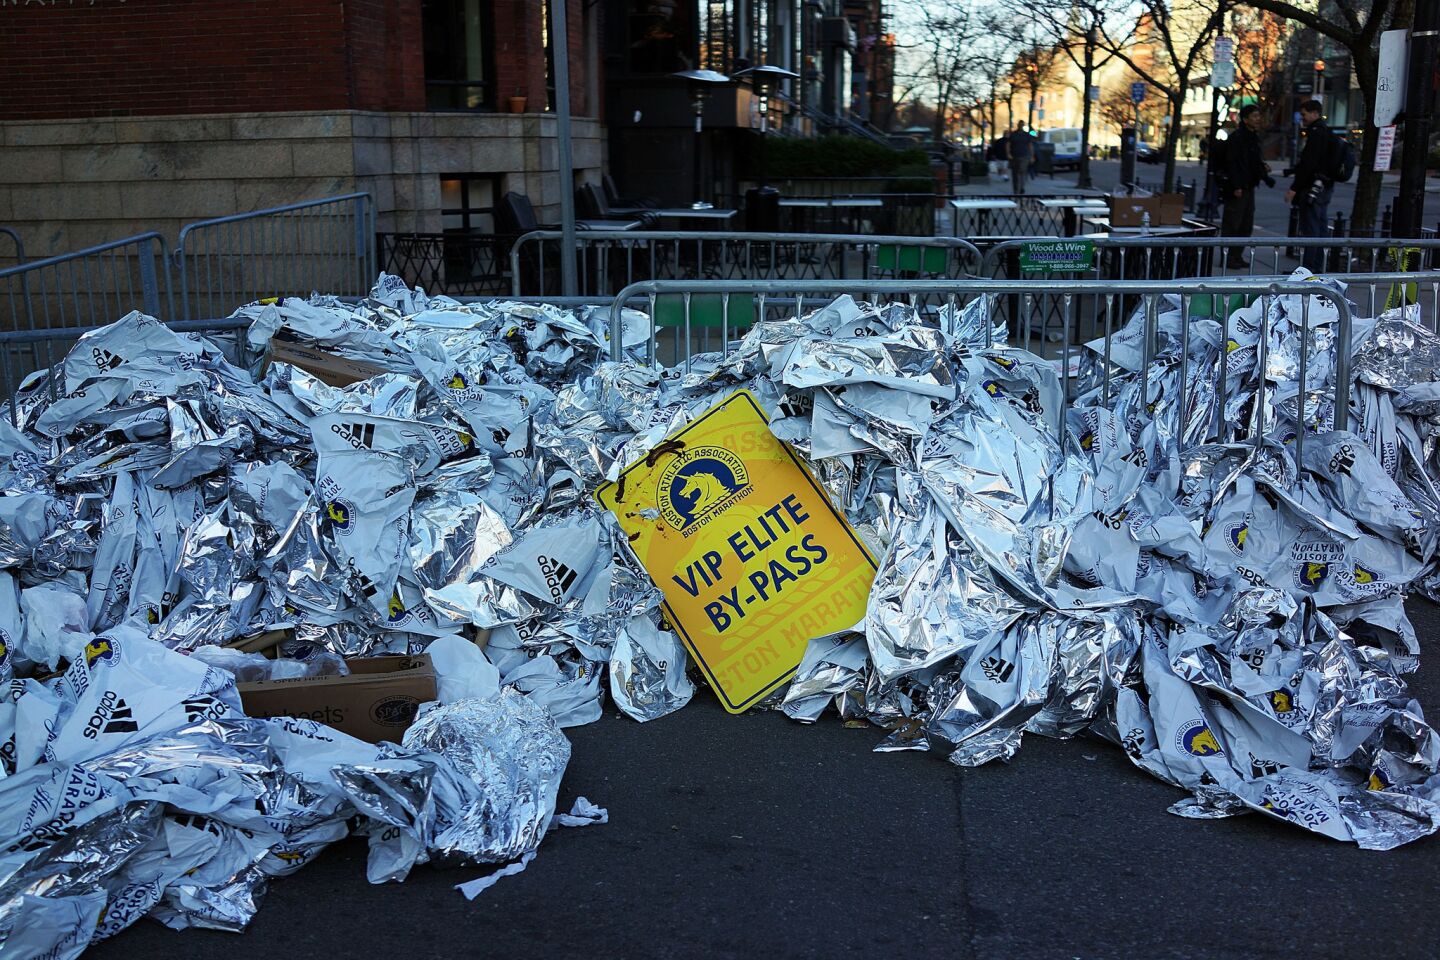 Unused thermal blankets meant for marathon participants are piled near the scene of a twin bombings at the Boston Marathon.